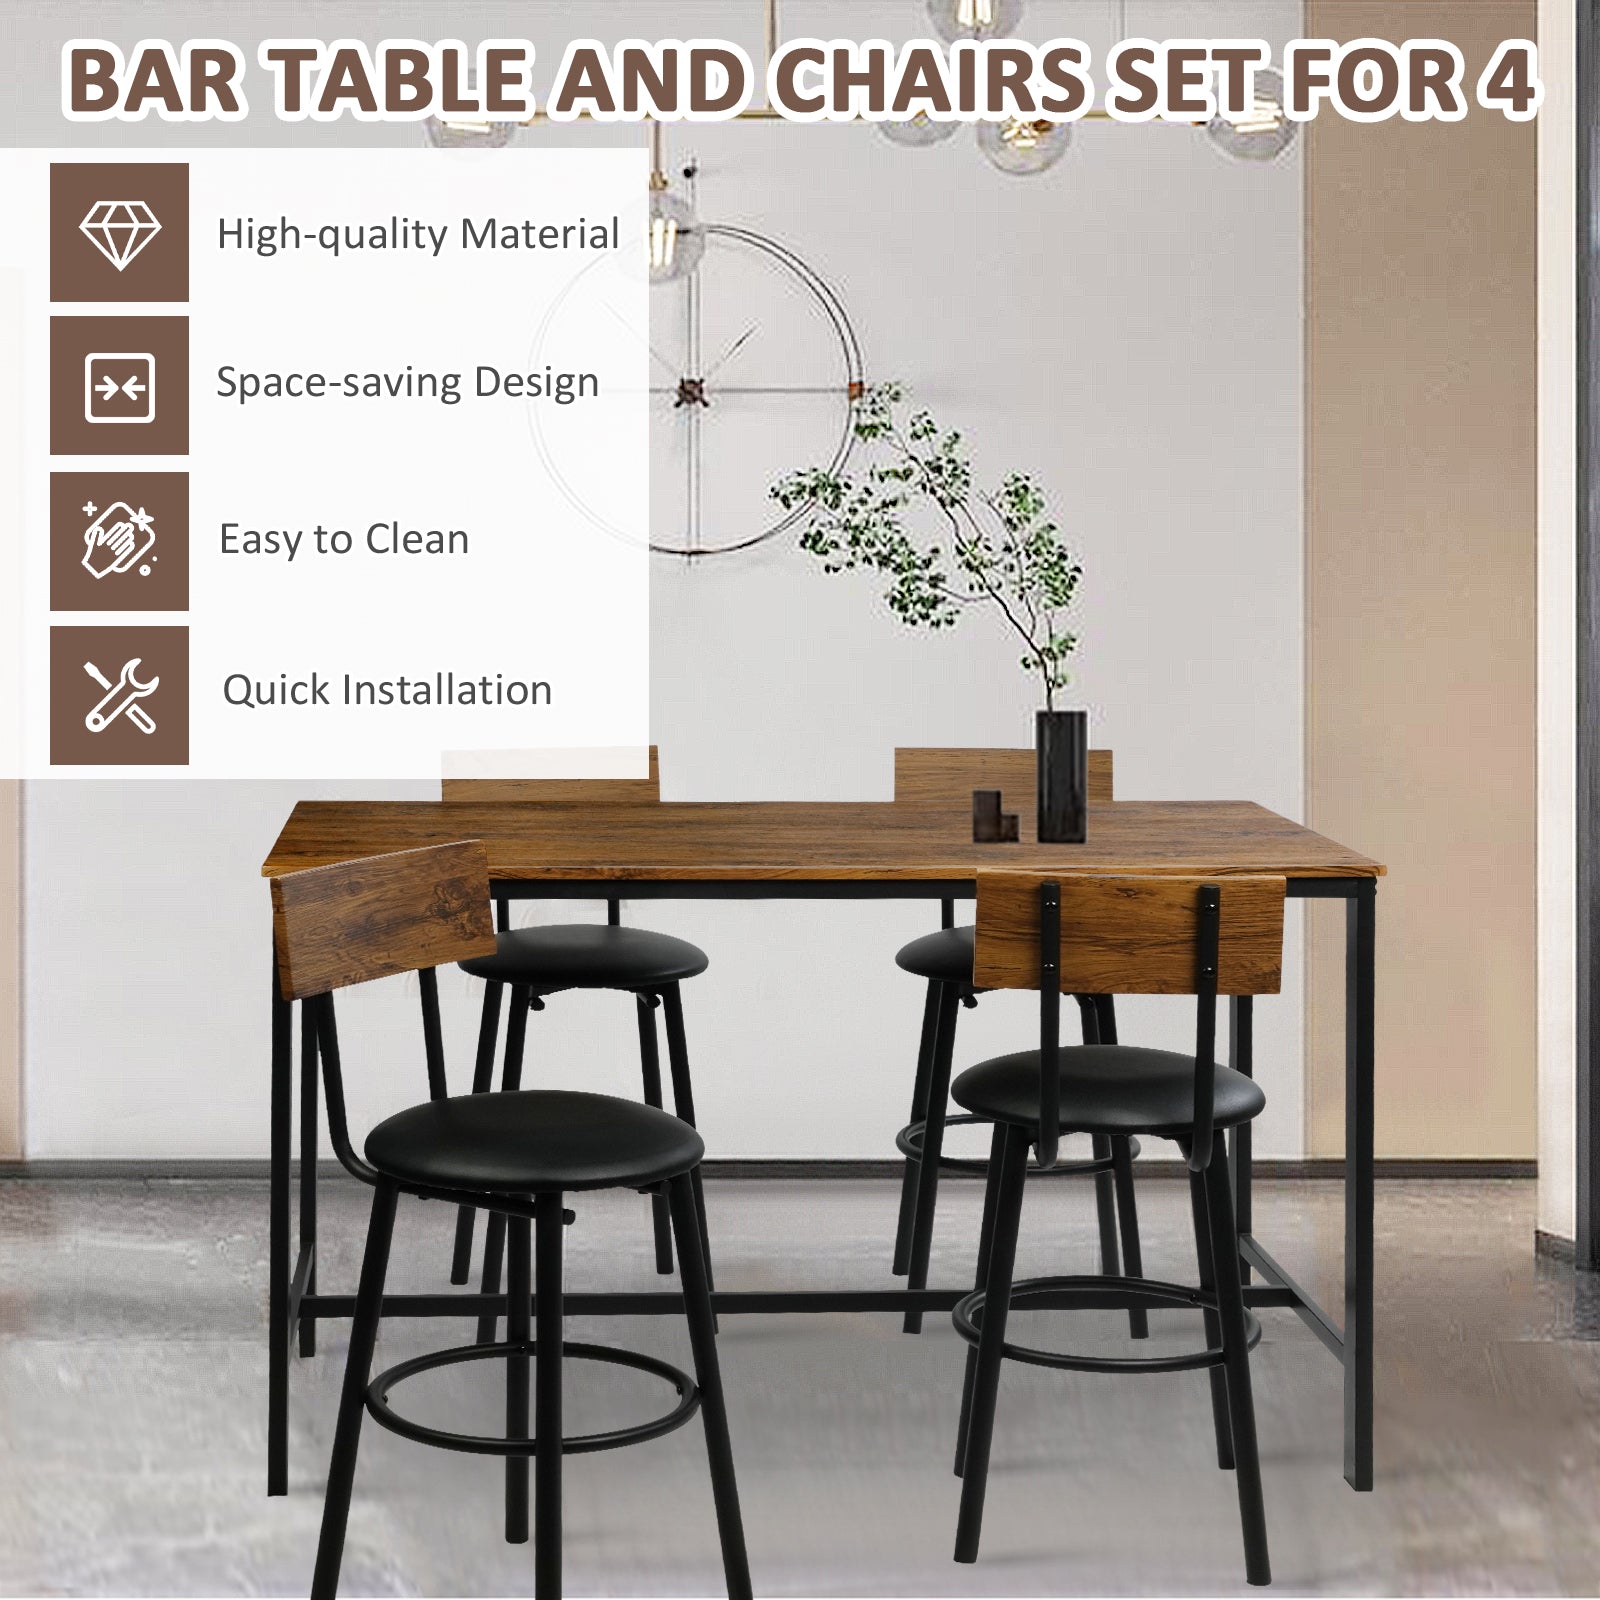 5 Piece Dining Bar Table Set, 1 Bar Table 47.3" for 4 with 4 Upholstered Bar Stools